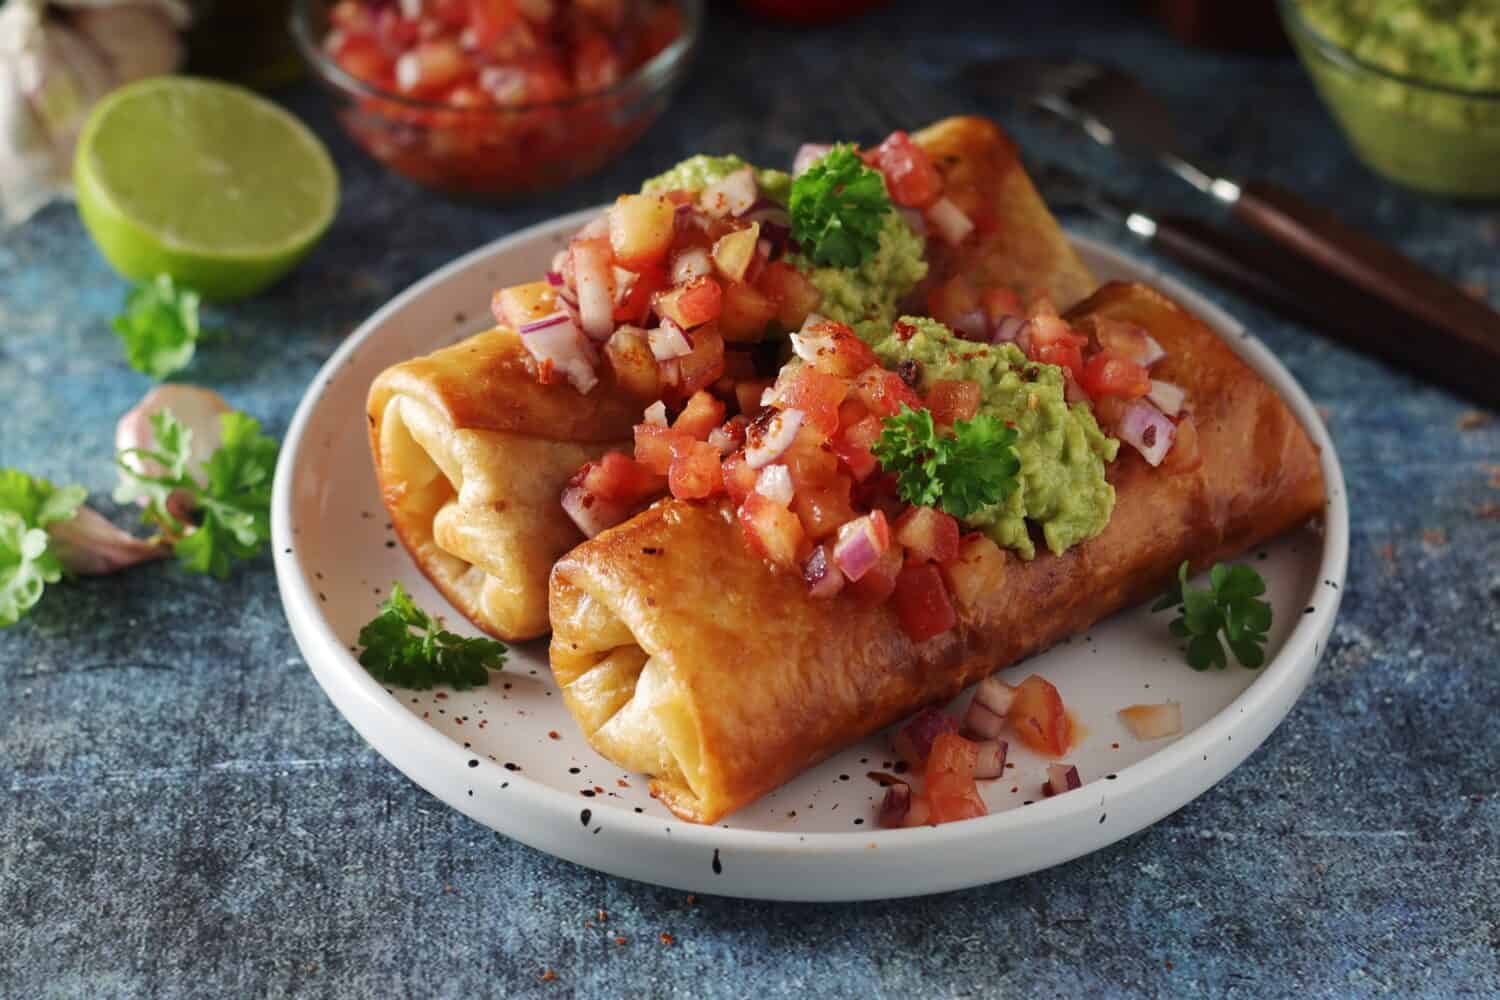 Chimichangas vs. Flautas: A typical dish of Mexican cuisine - Chimichanga, made of tortilla with different ingredients